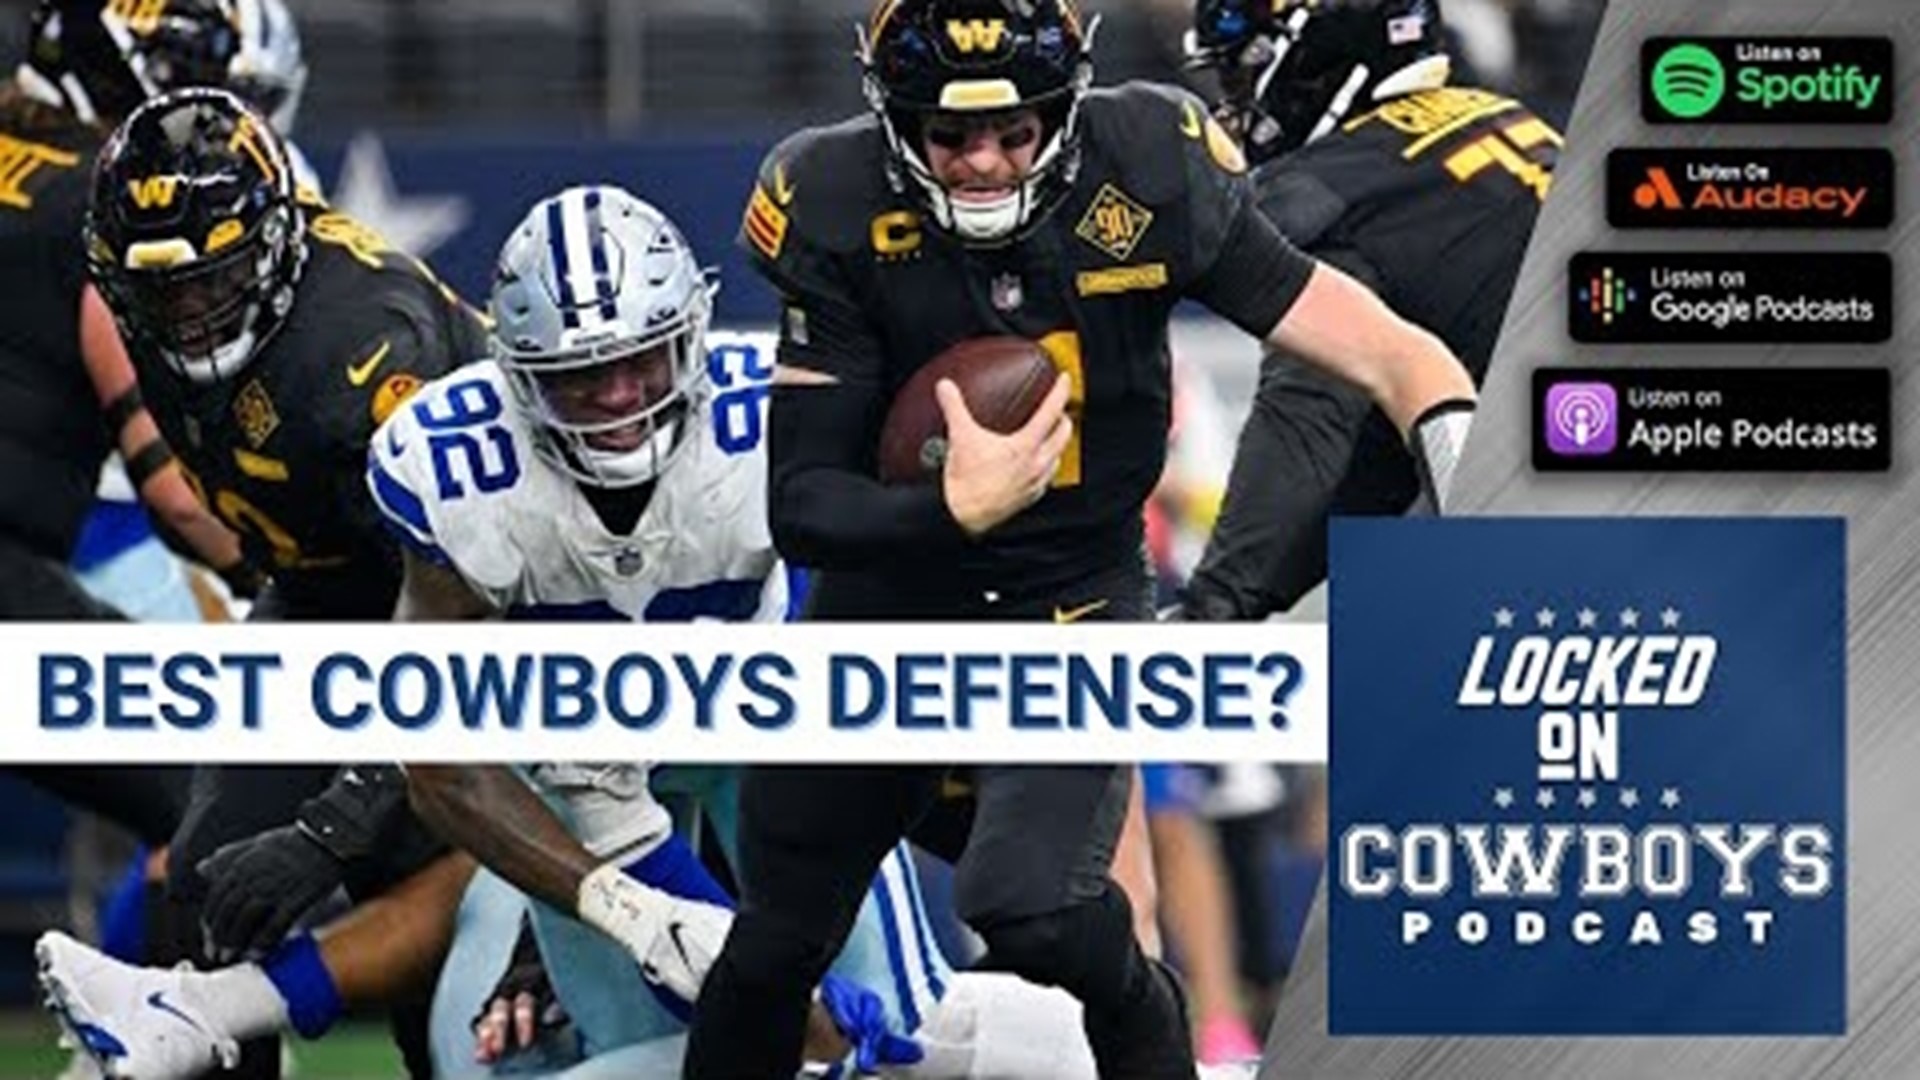 Marcus Mosher and Landon McCool review their All-22 notes and discuss if this is the best defense the Dallas Cowboys have had over the last 25 years.